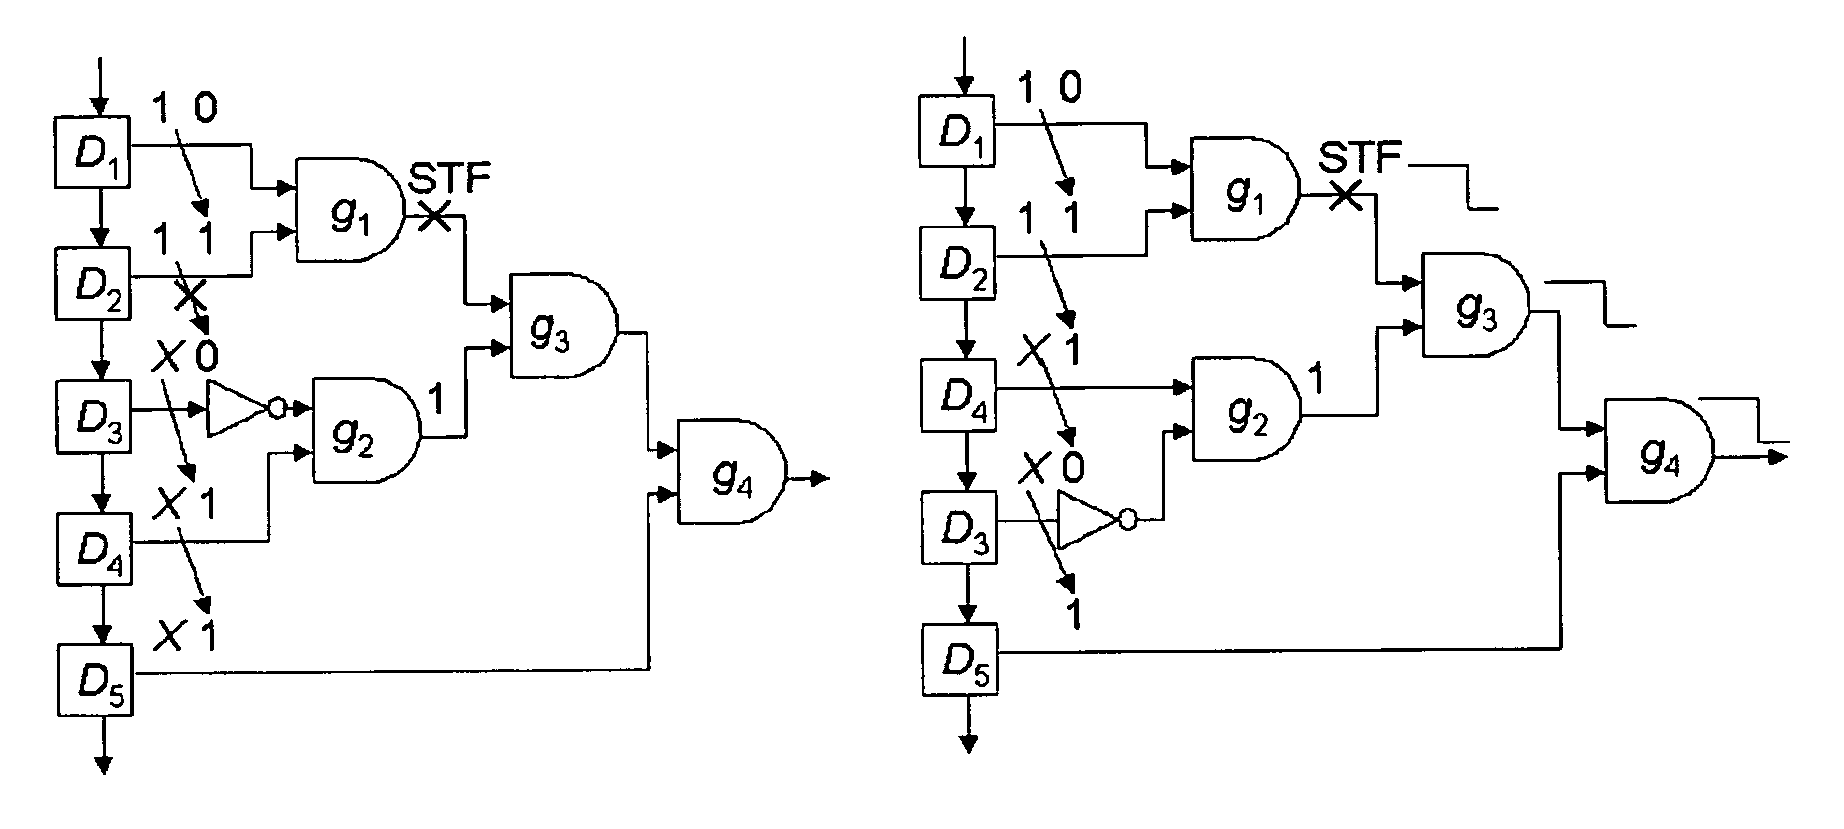 Restricted scan reordering technique to enhance delay fault coverage